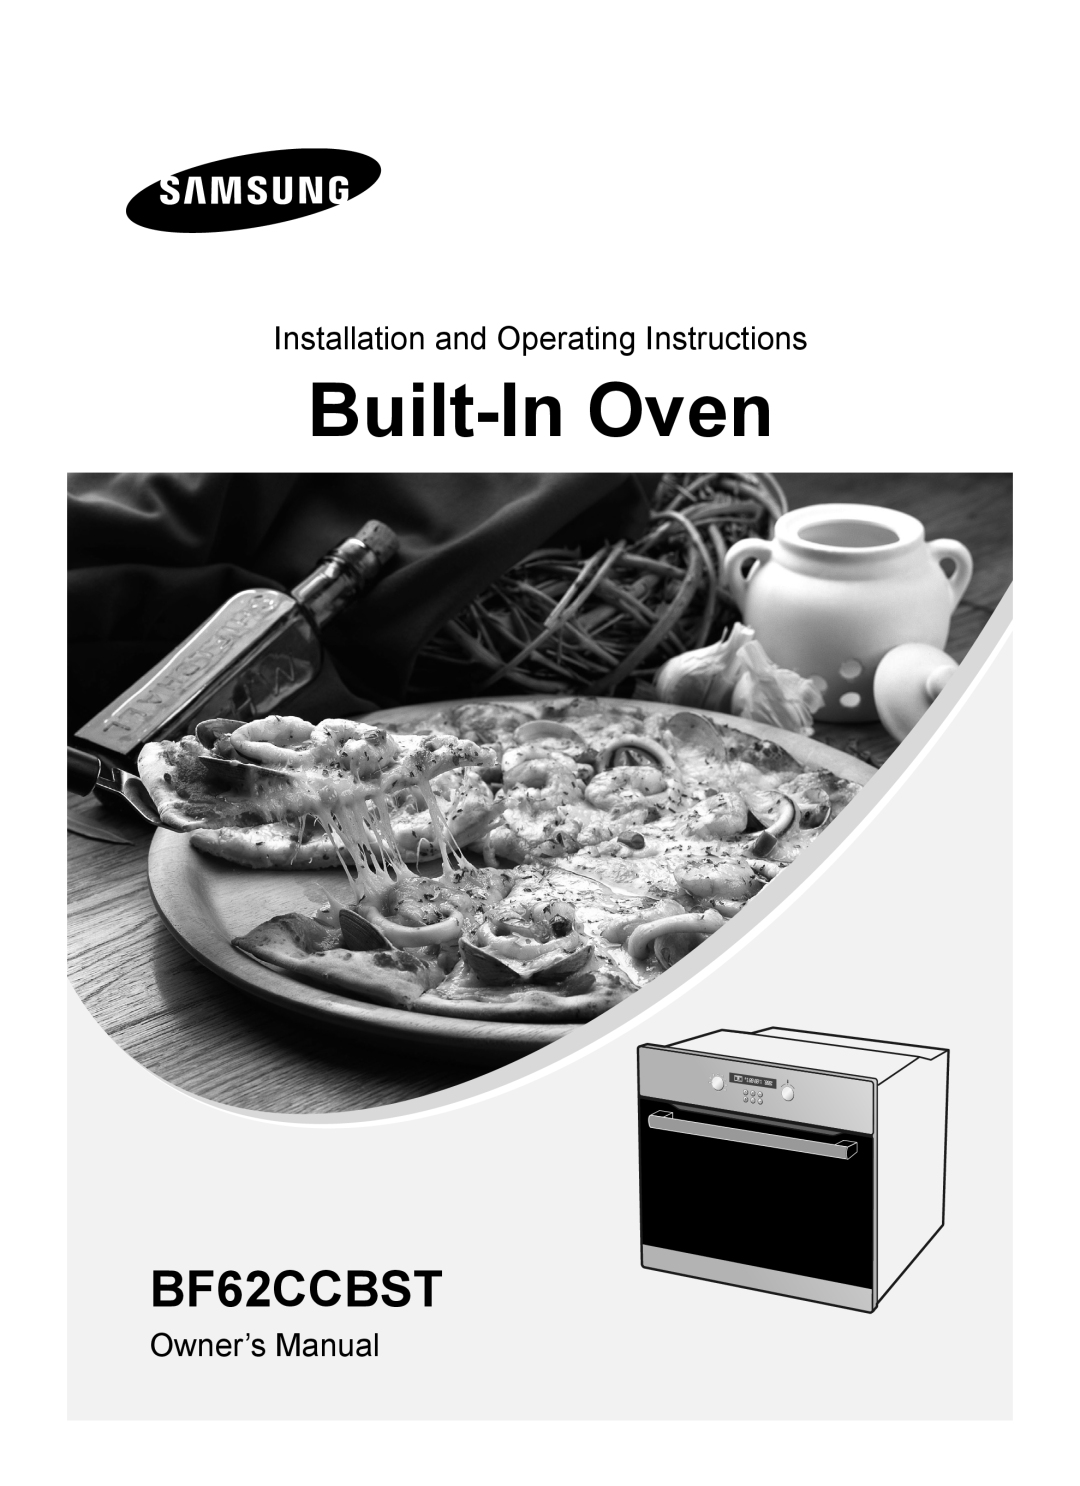 Samsung BF62CCBST owner manual Built-InOven, Installation and Operating Instructions 